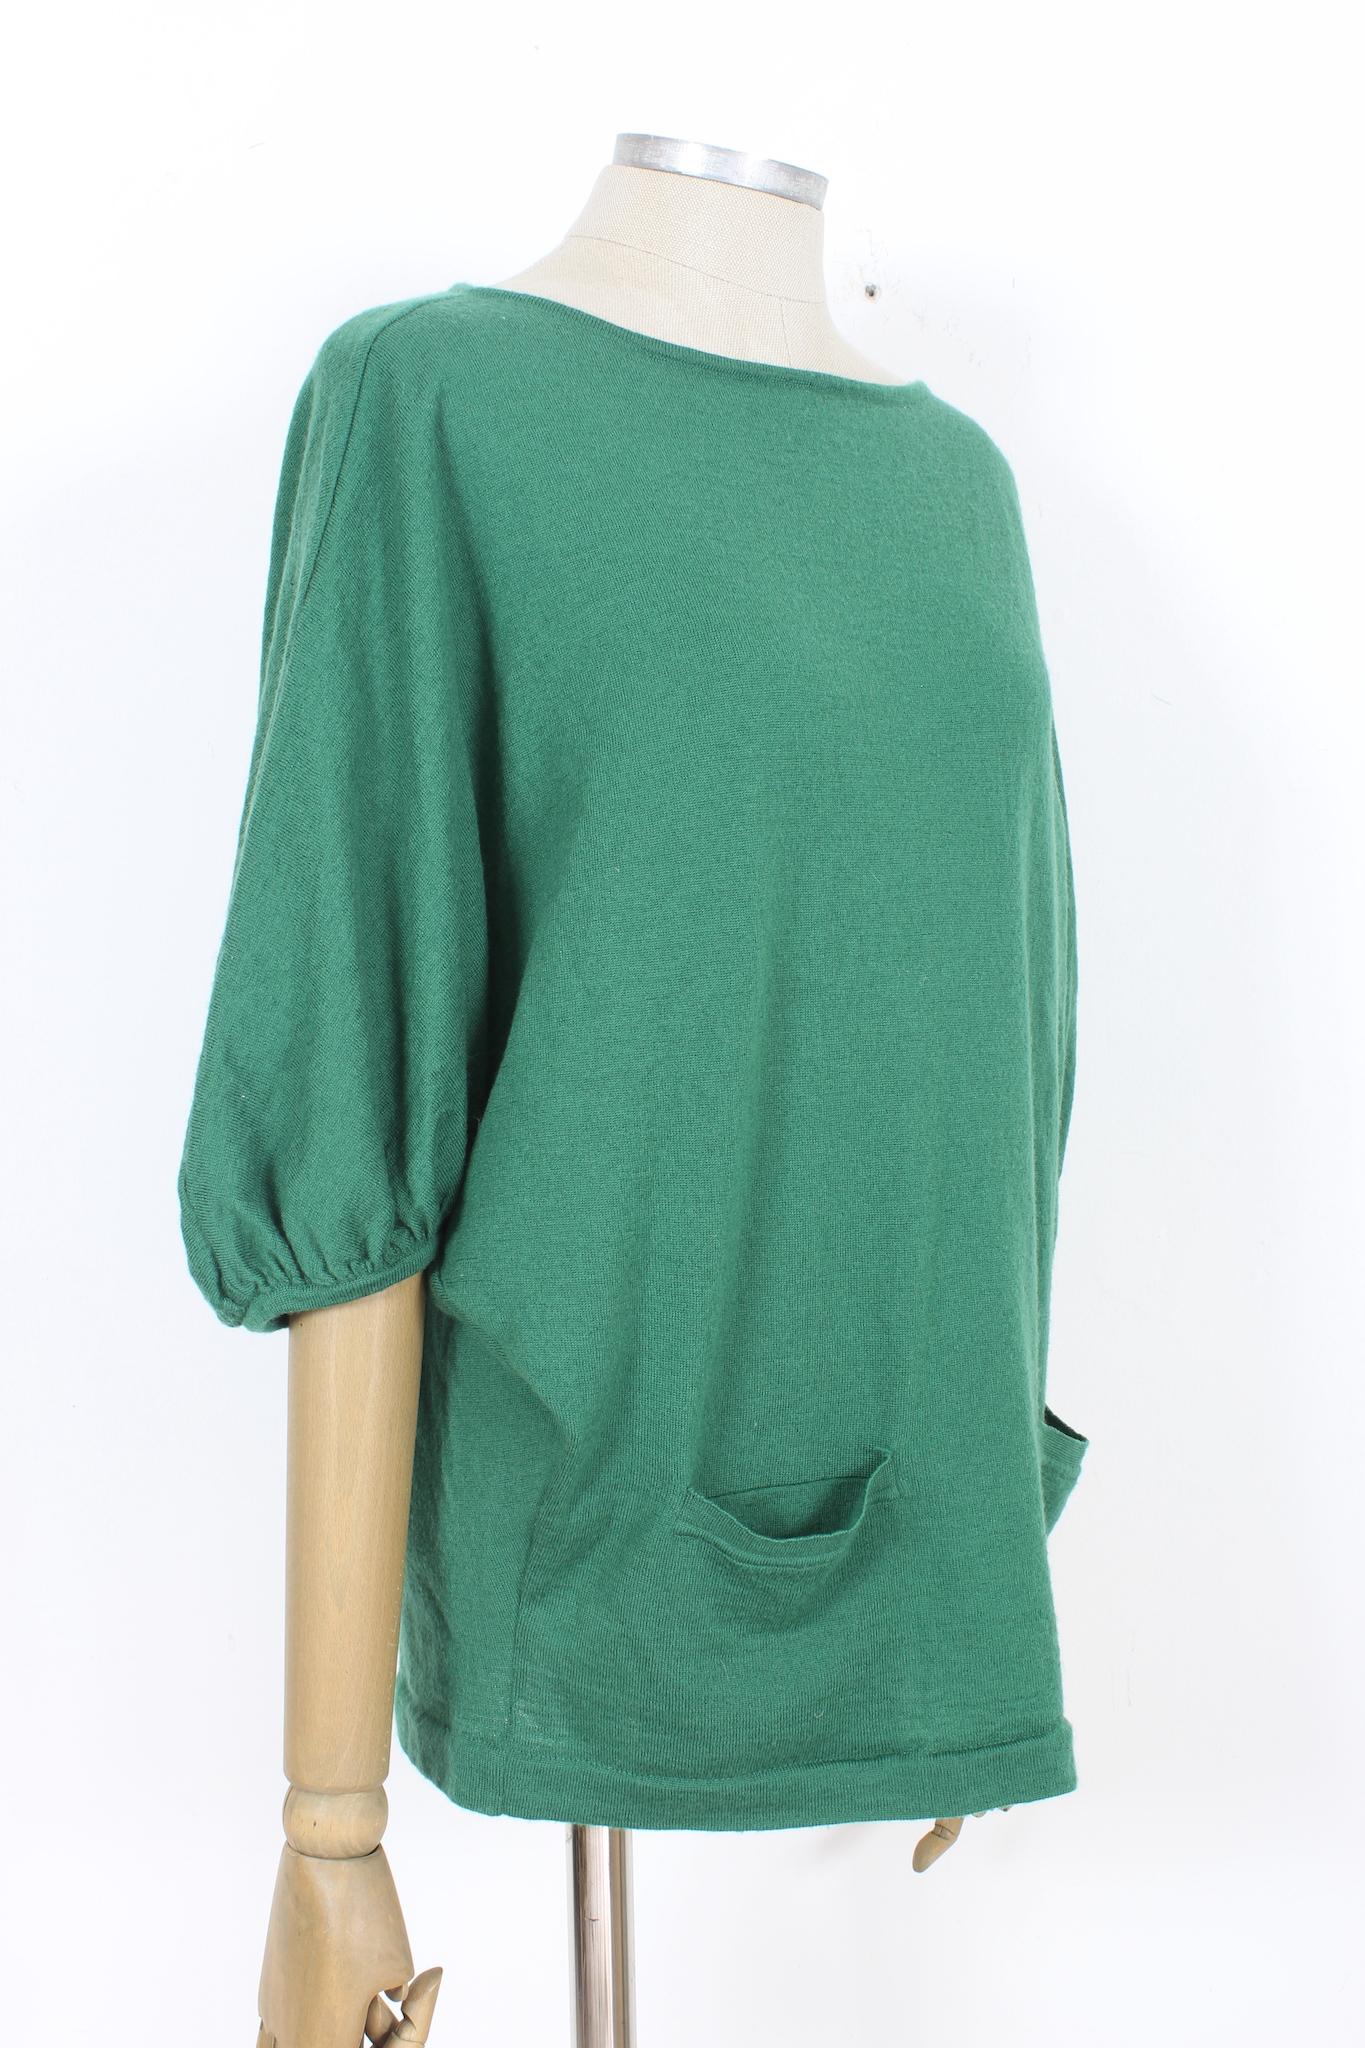 Alberta Ferretti 2000s casual sweater. Soft sweater with wide 3/4 sleeves, green color, 100% wool. Made in Italy.

Size: 40 It 6 Us 8 Uk

Shoulder: 46 cm
Bust/Chest: 68 cm
Sleeve: 42 cm
Length: 64 cm